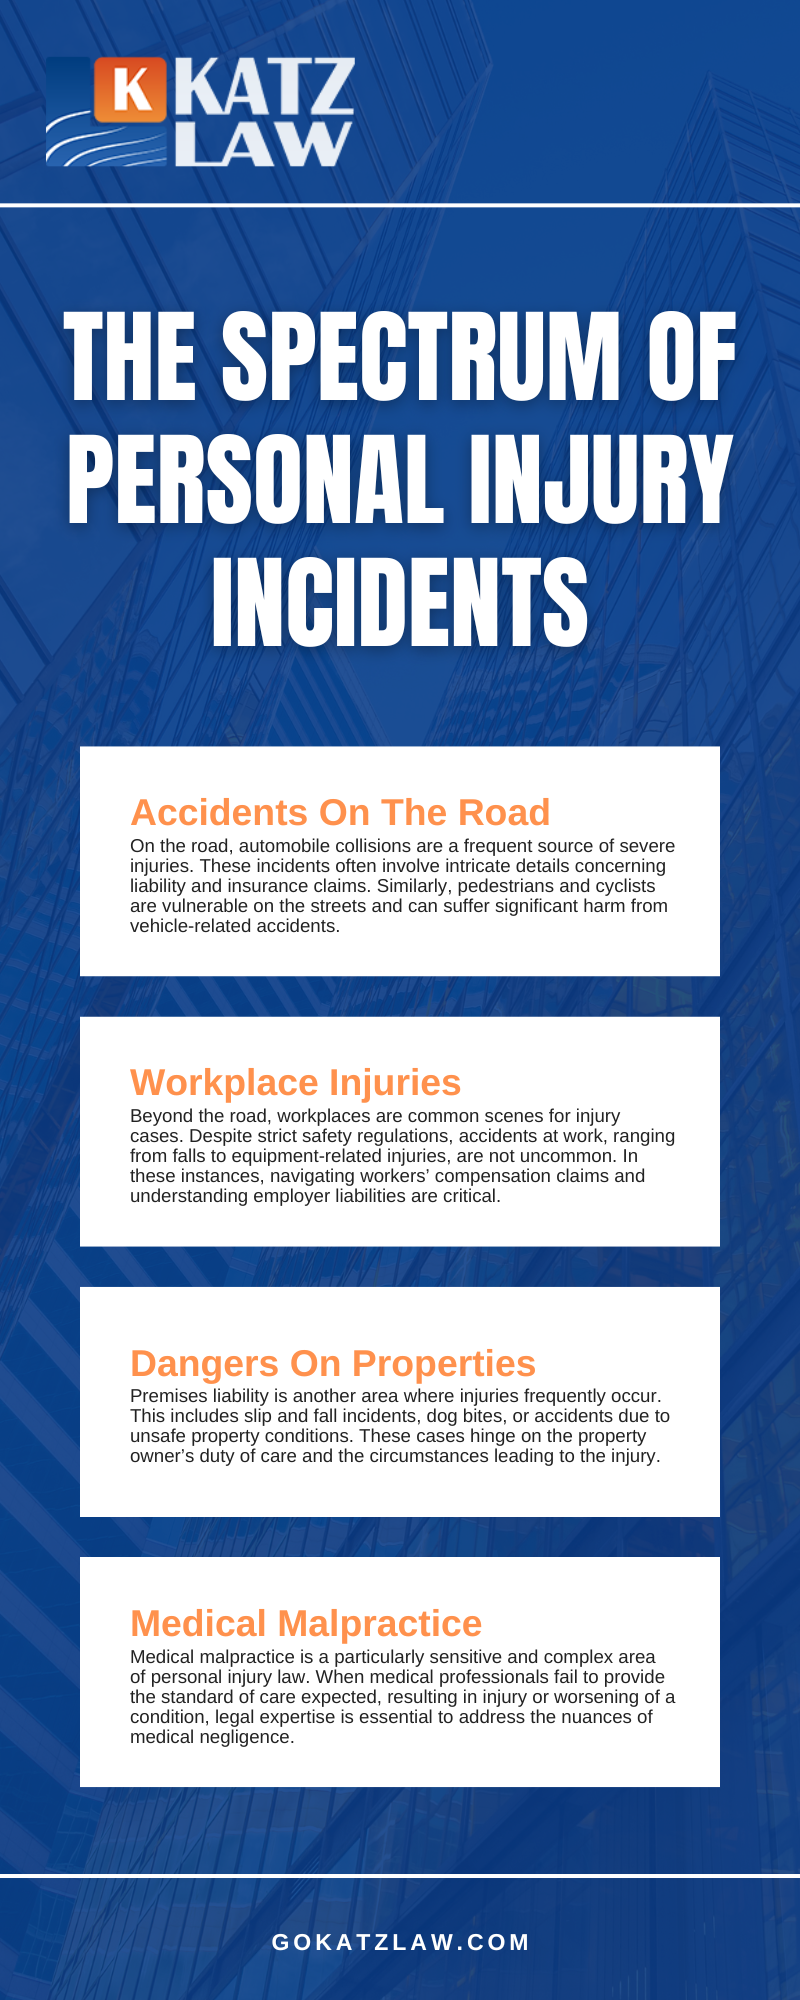 The Spectrum Of Personal Injury Incidents Infographic